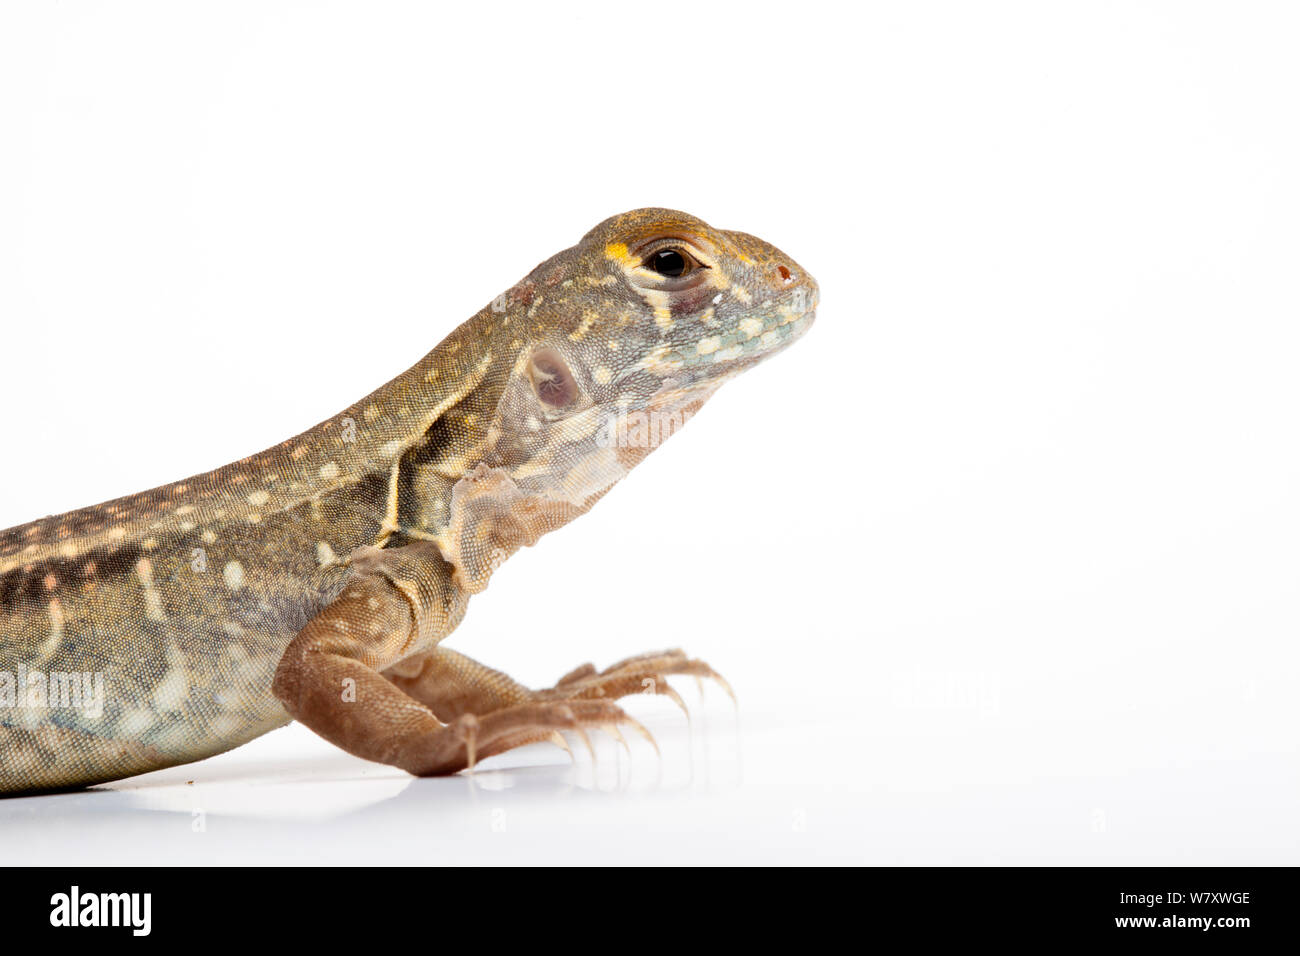 Chinese butterfly lizard (Leiolepis reevesii) on white background, captive from South East Asia. Stock Photo